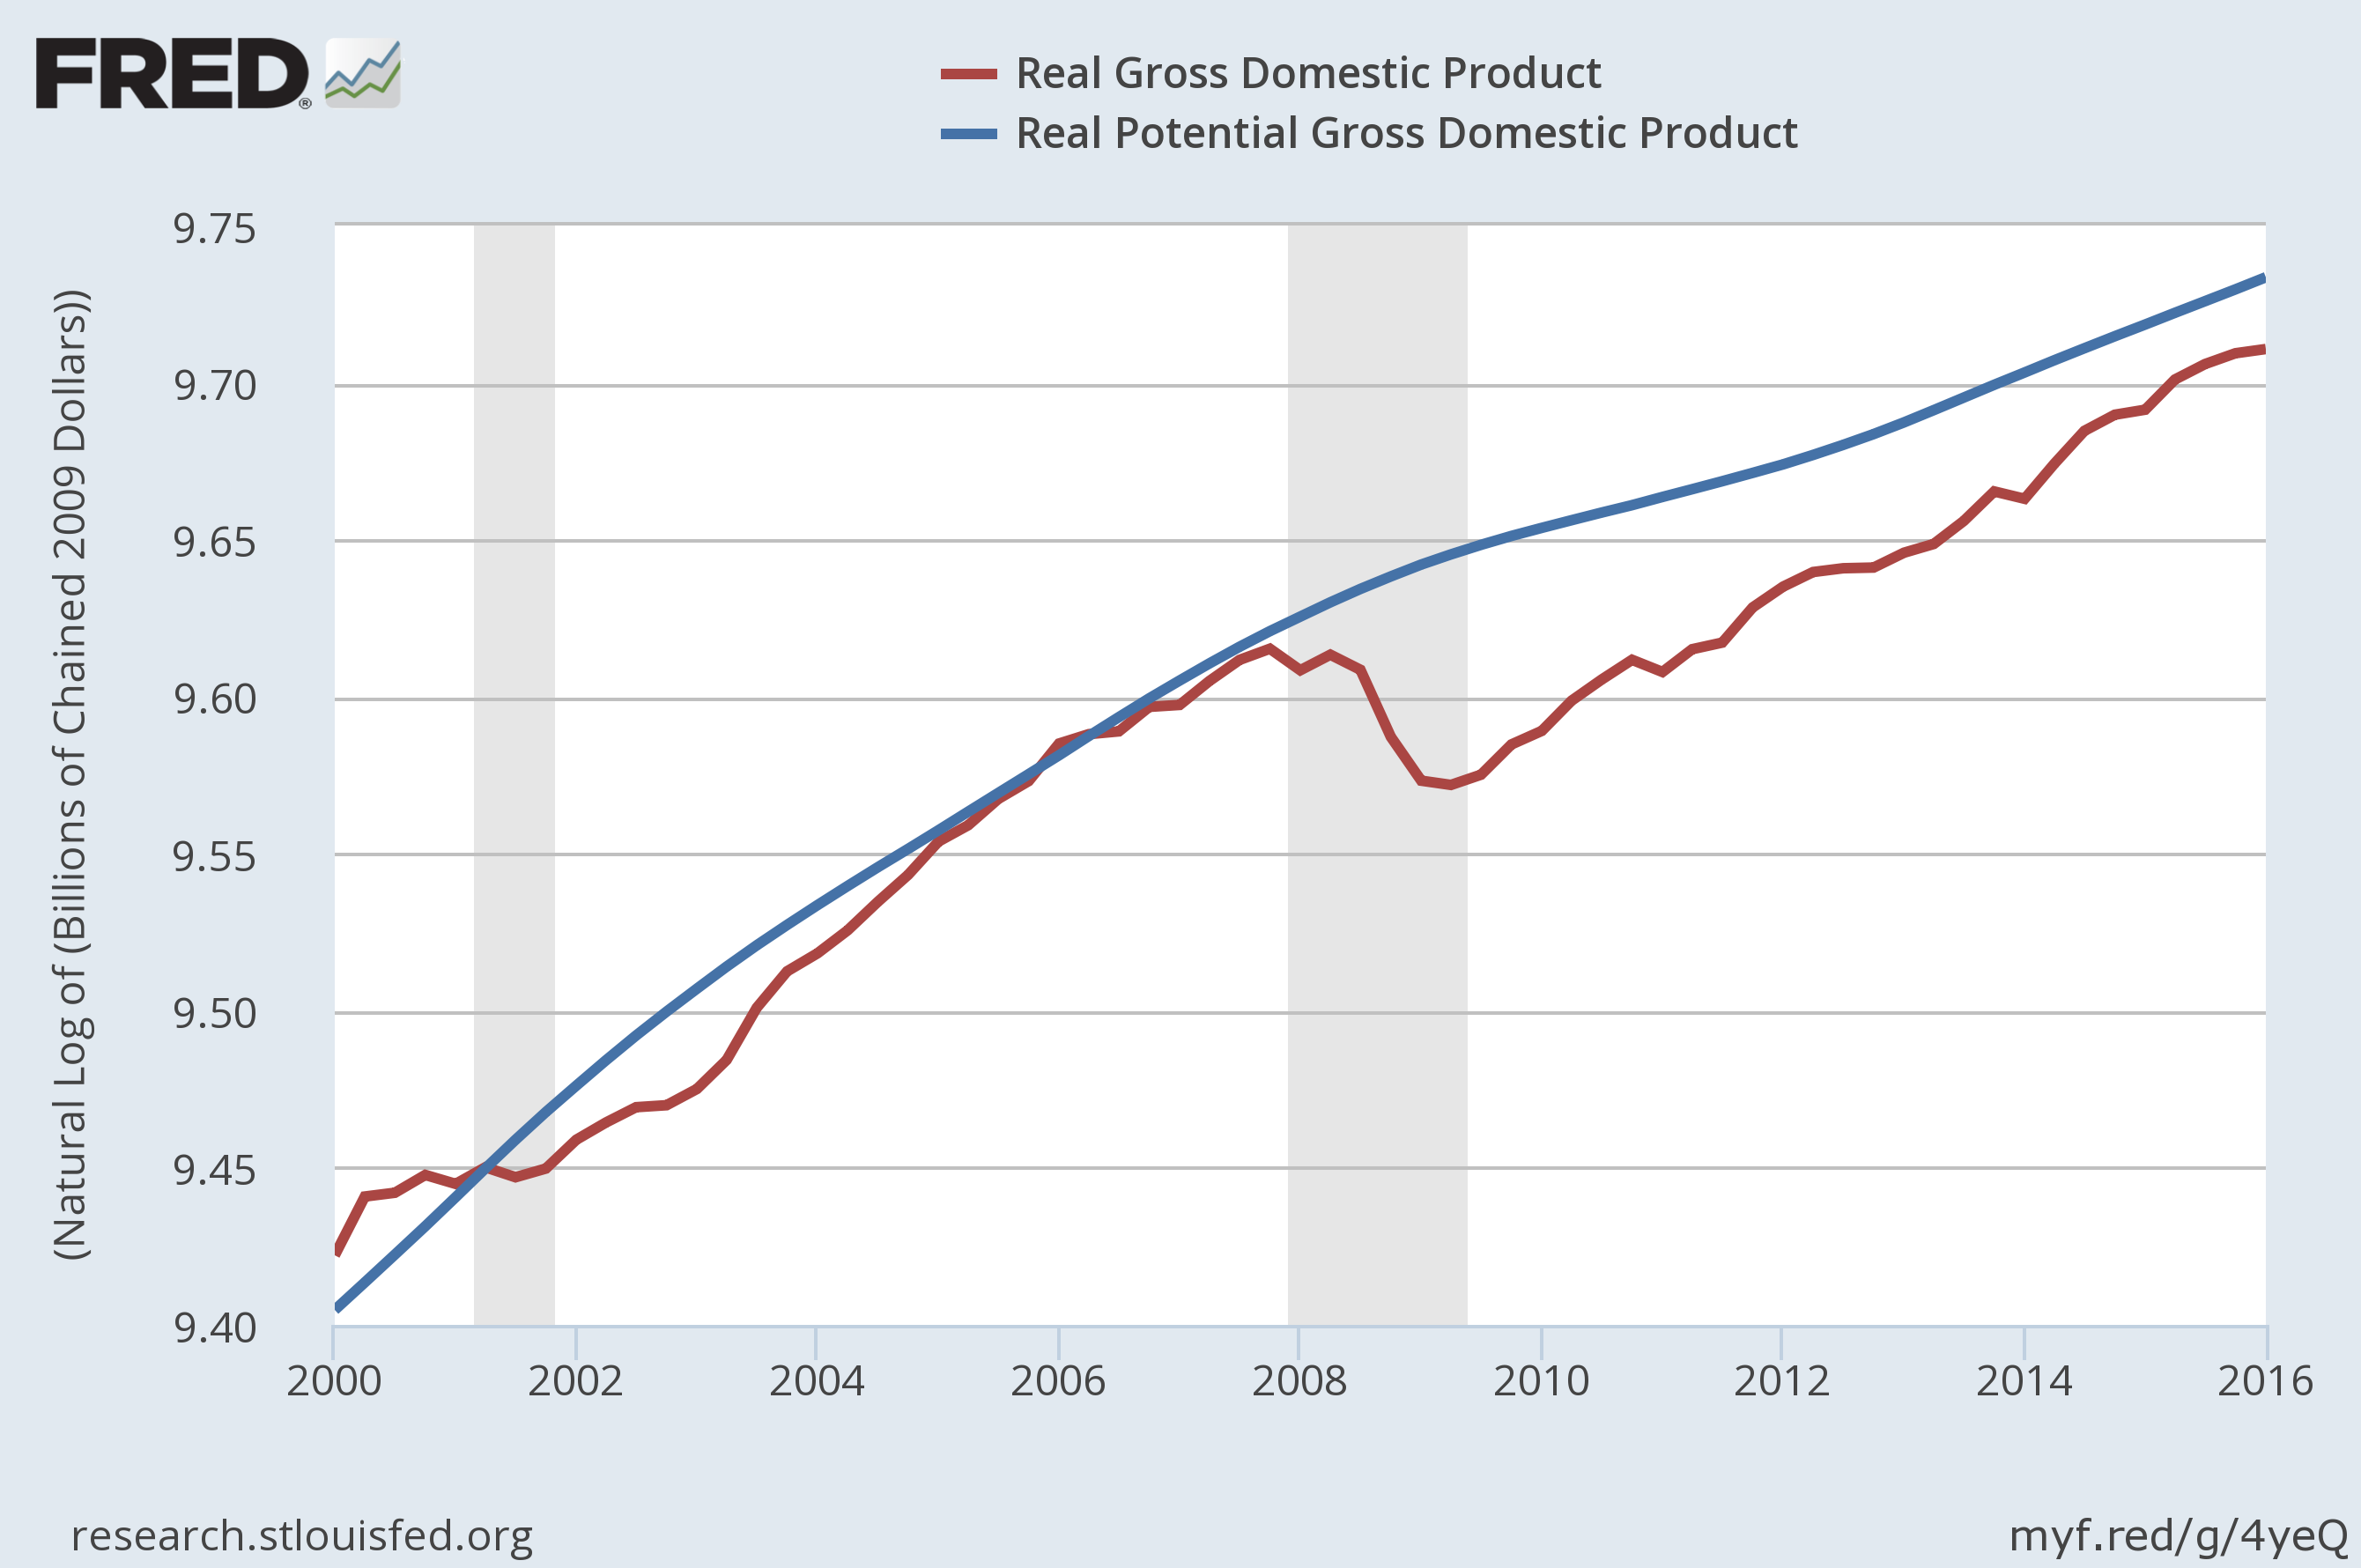 Line graph showing real GDP and potential GDP between 2000 and 2016. The lines stay close through many of the years, but in 2001, real GDP falls behind and takes 5 years to recover, then real GDP falls again in 20018 and has not yet recovered by 2016.